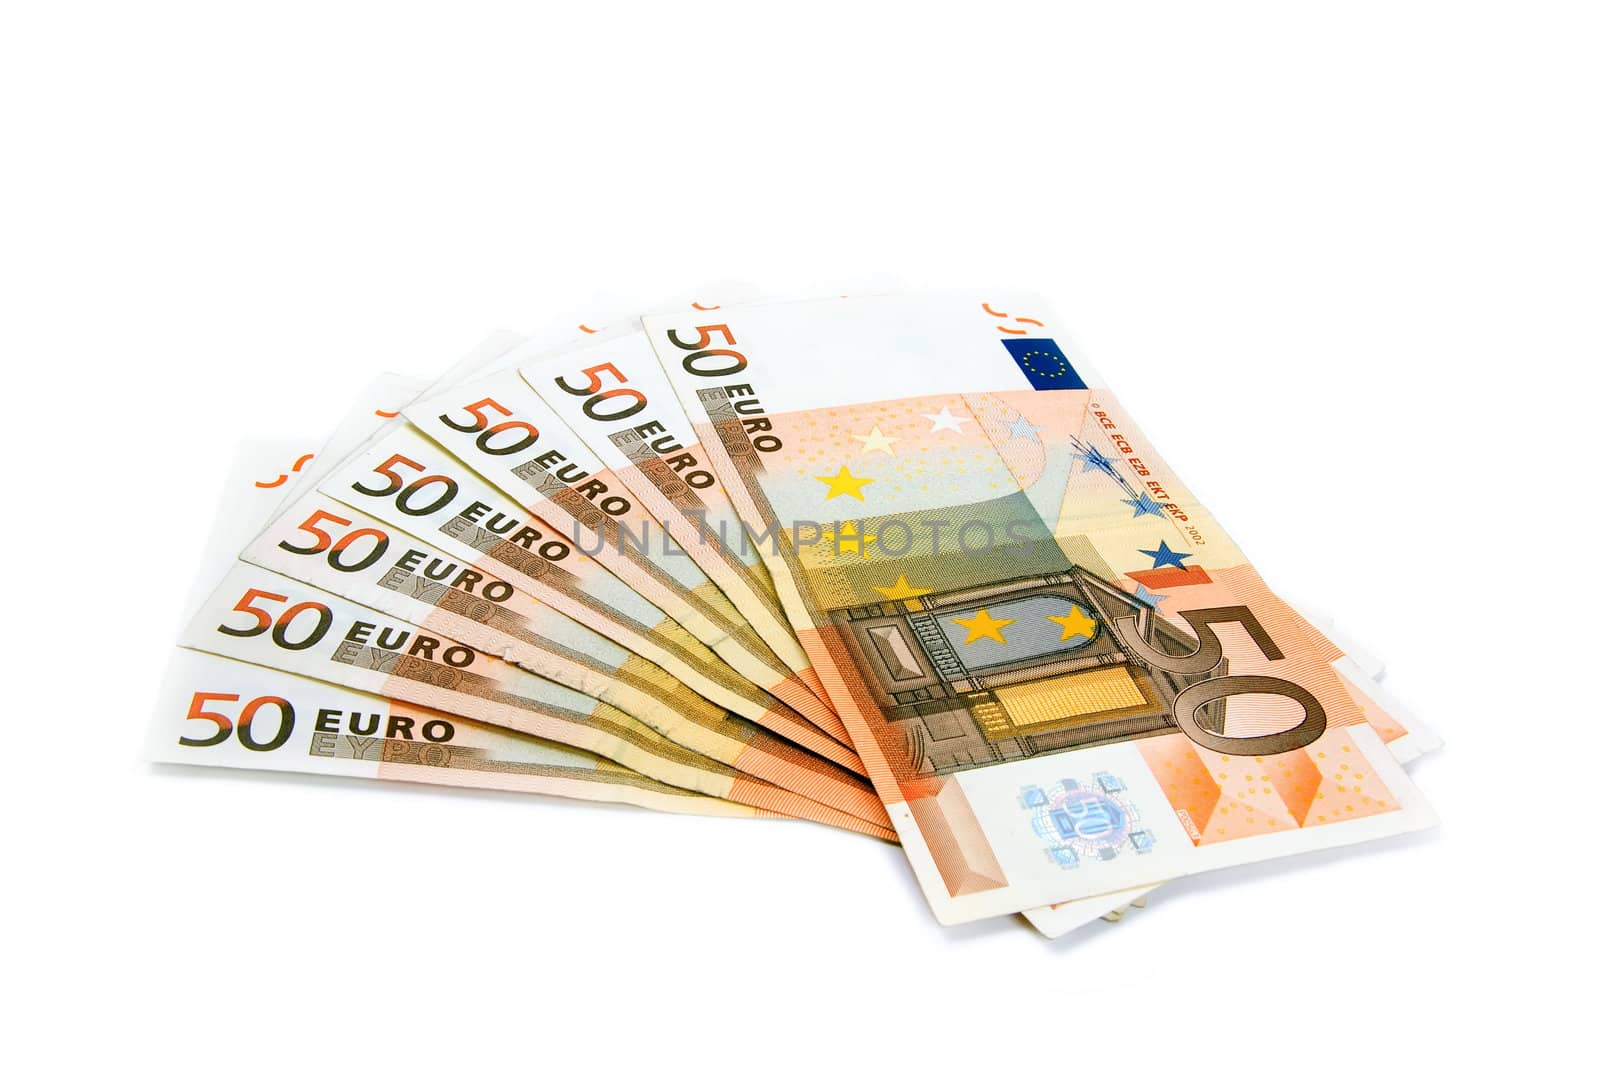 Fifty euro banknotes detail for background use business and finance concepts.